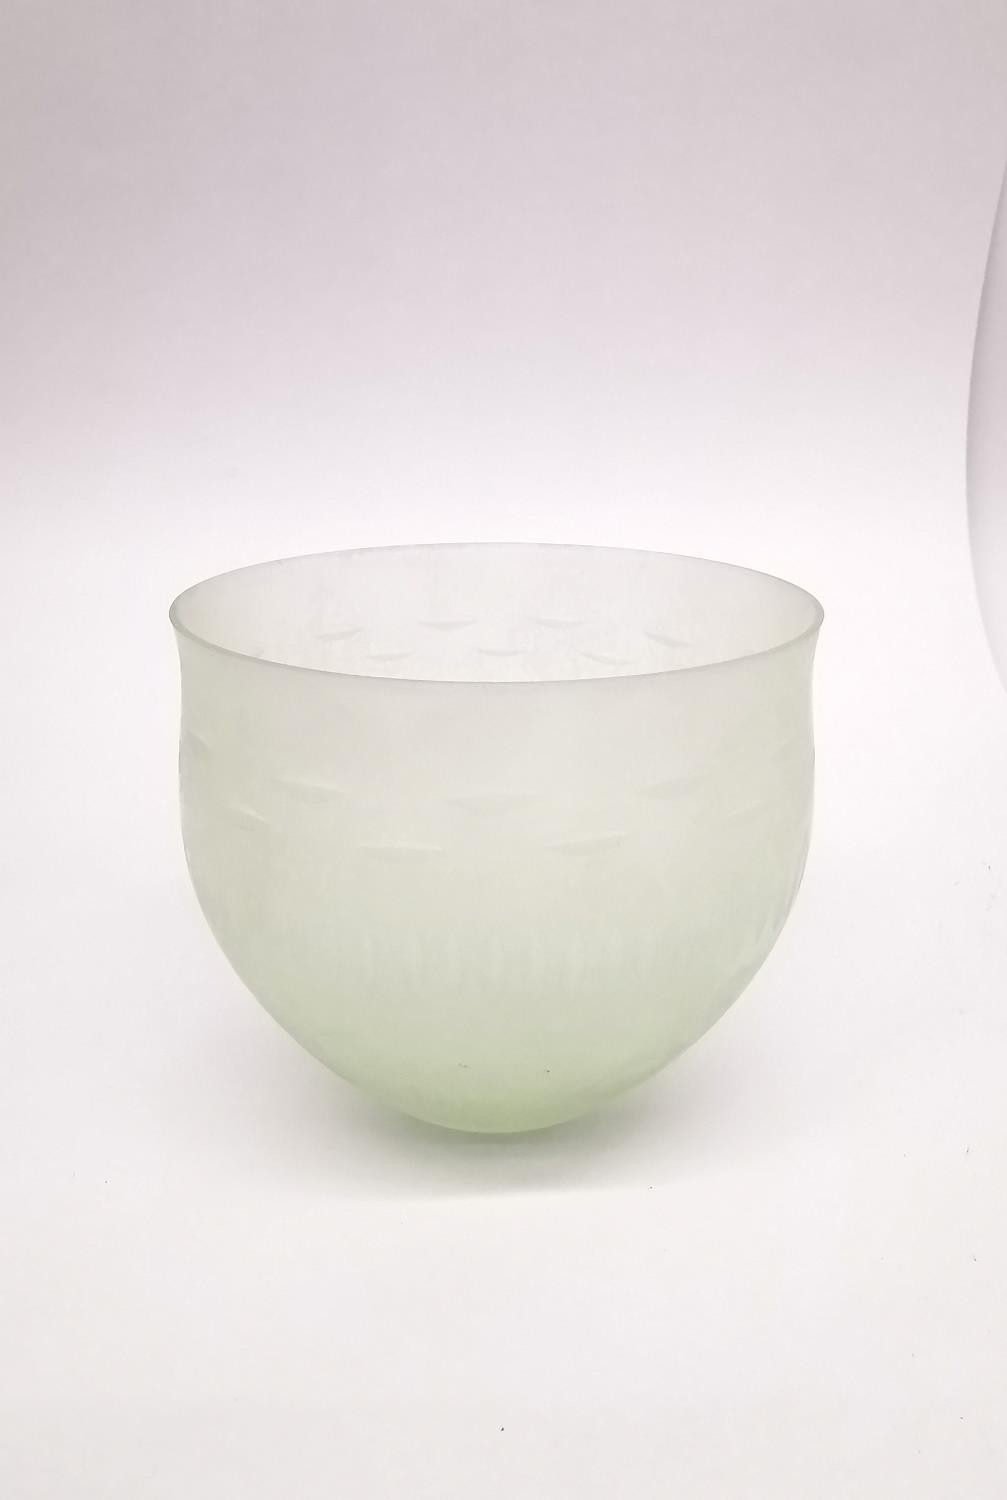 A CCAA Glasgalerie RGM/RCM glass roman replica frosted bowl with green hue fading to opaque with - Image 2 of 10